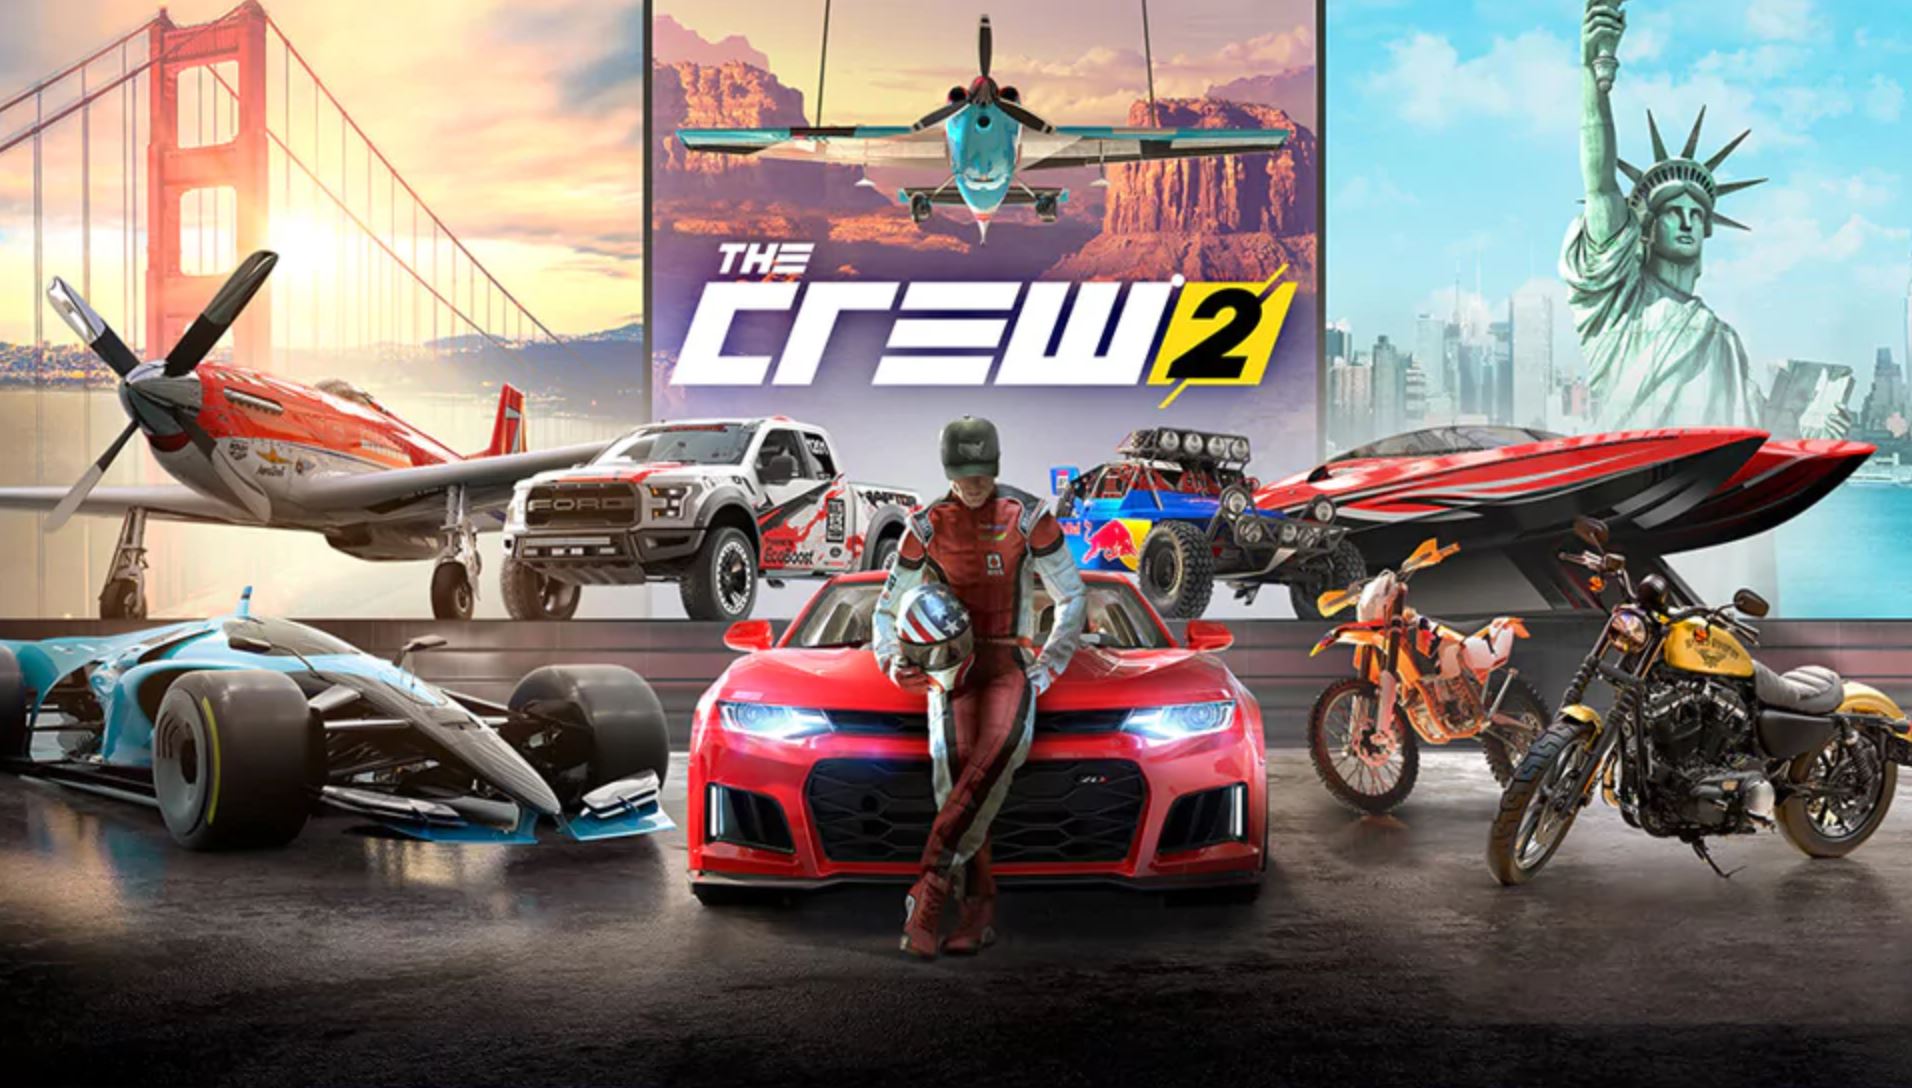 Don't Forget The Crew 2 Open Beta This Weekend